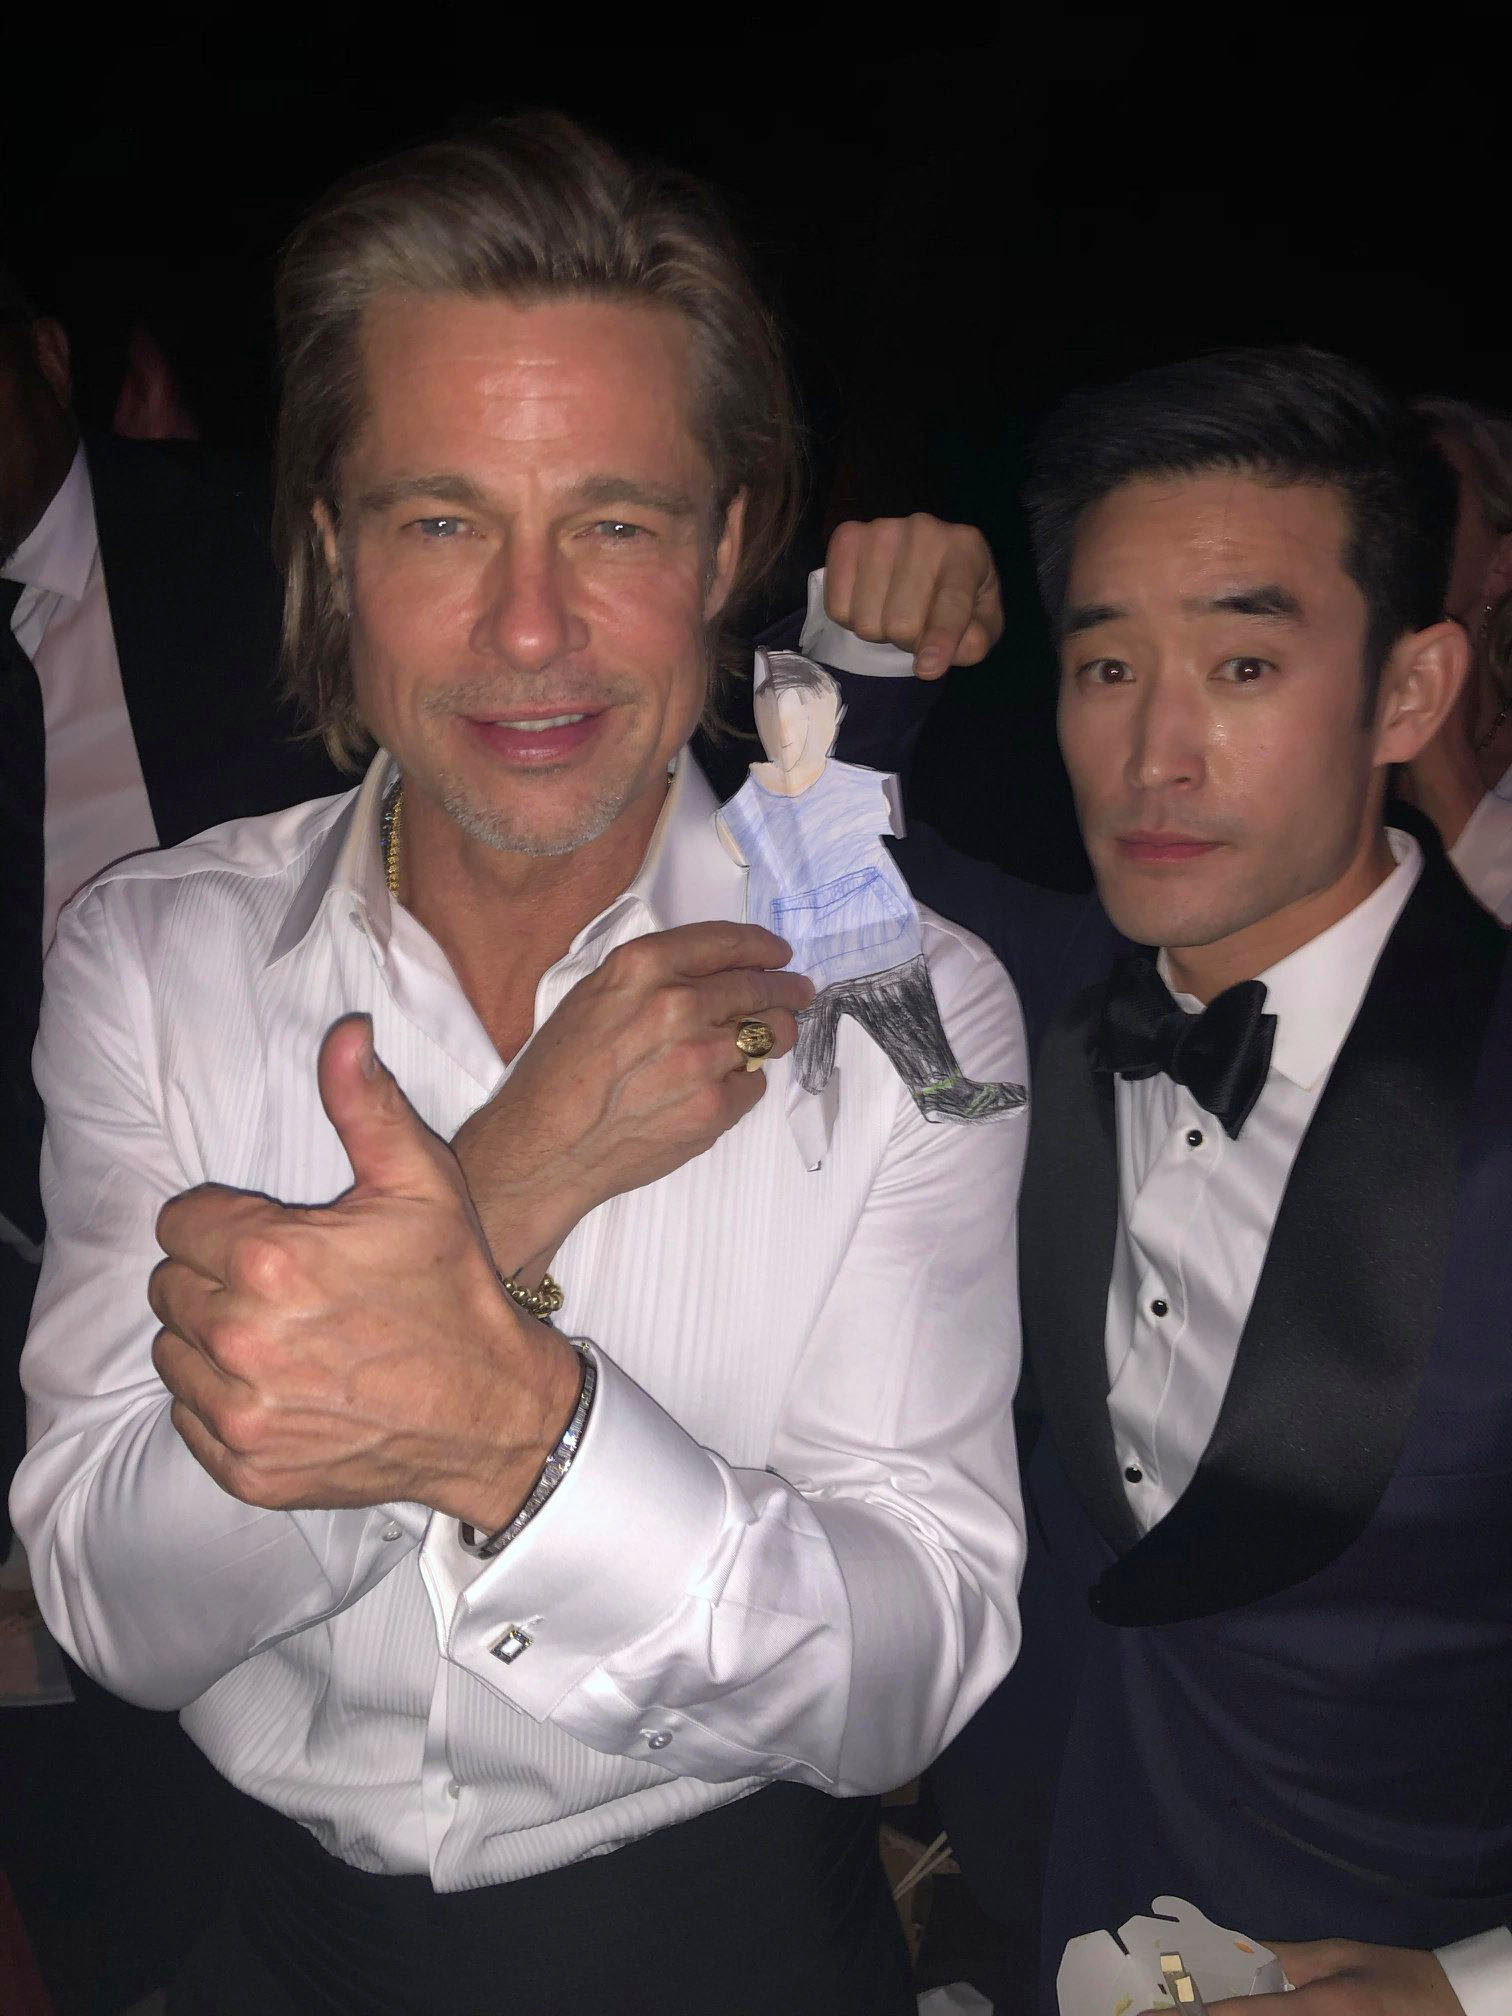 PHOTO: The Waunakee Community School District posted this photo of Brad Pitt with Mike Moh and Moh's son's 3rd grade project at the Screen Actors Guild Awards to their Facebook page.